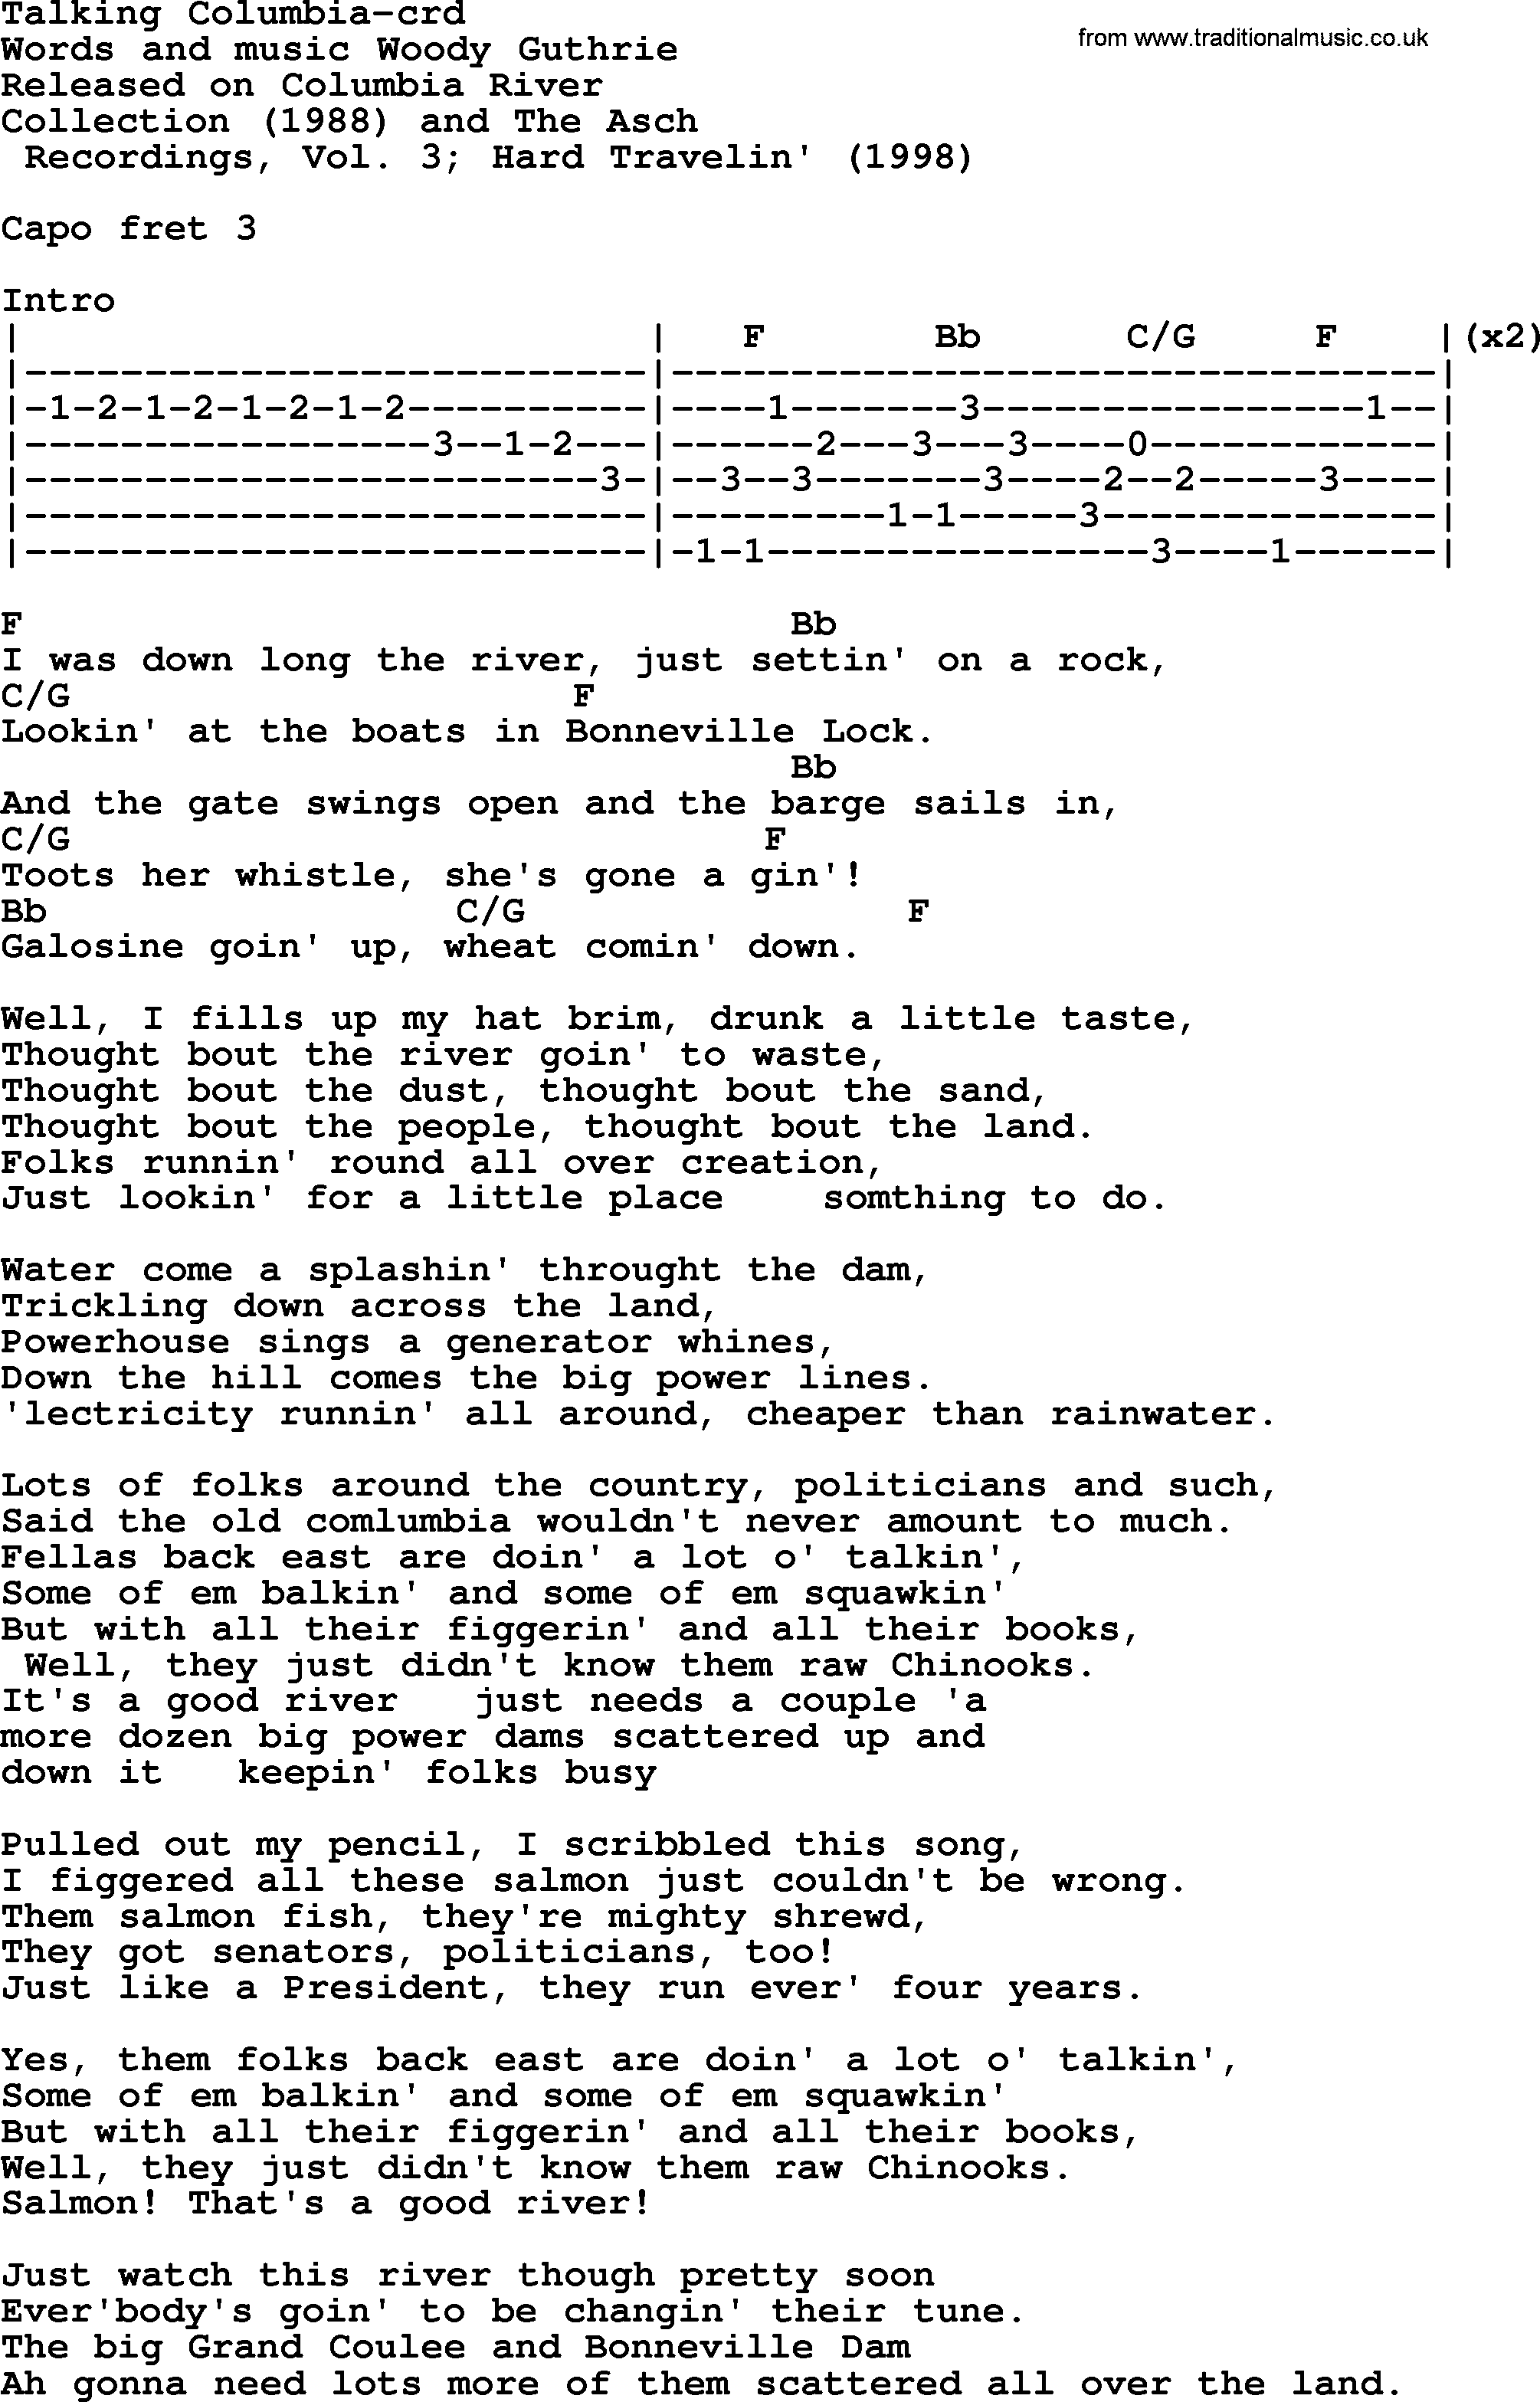 Woody Guthrie song Talking Columbia lyrics and chords